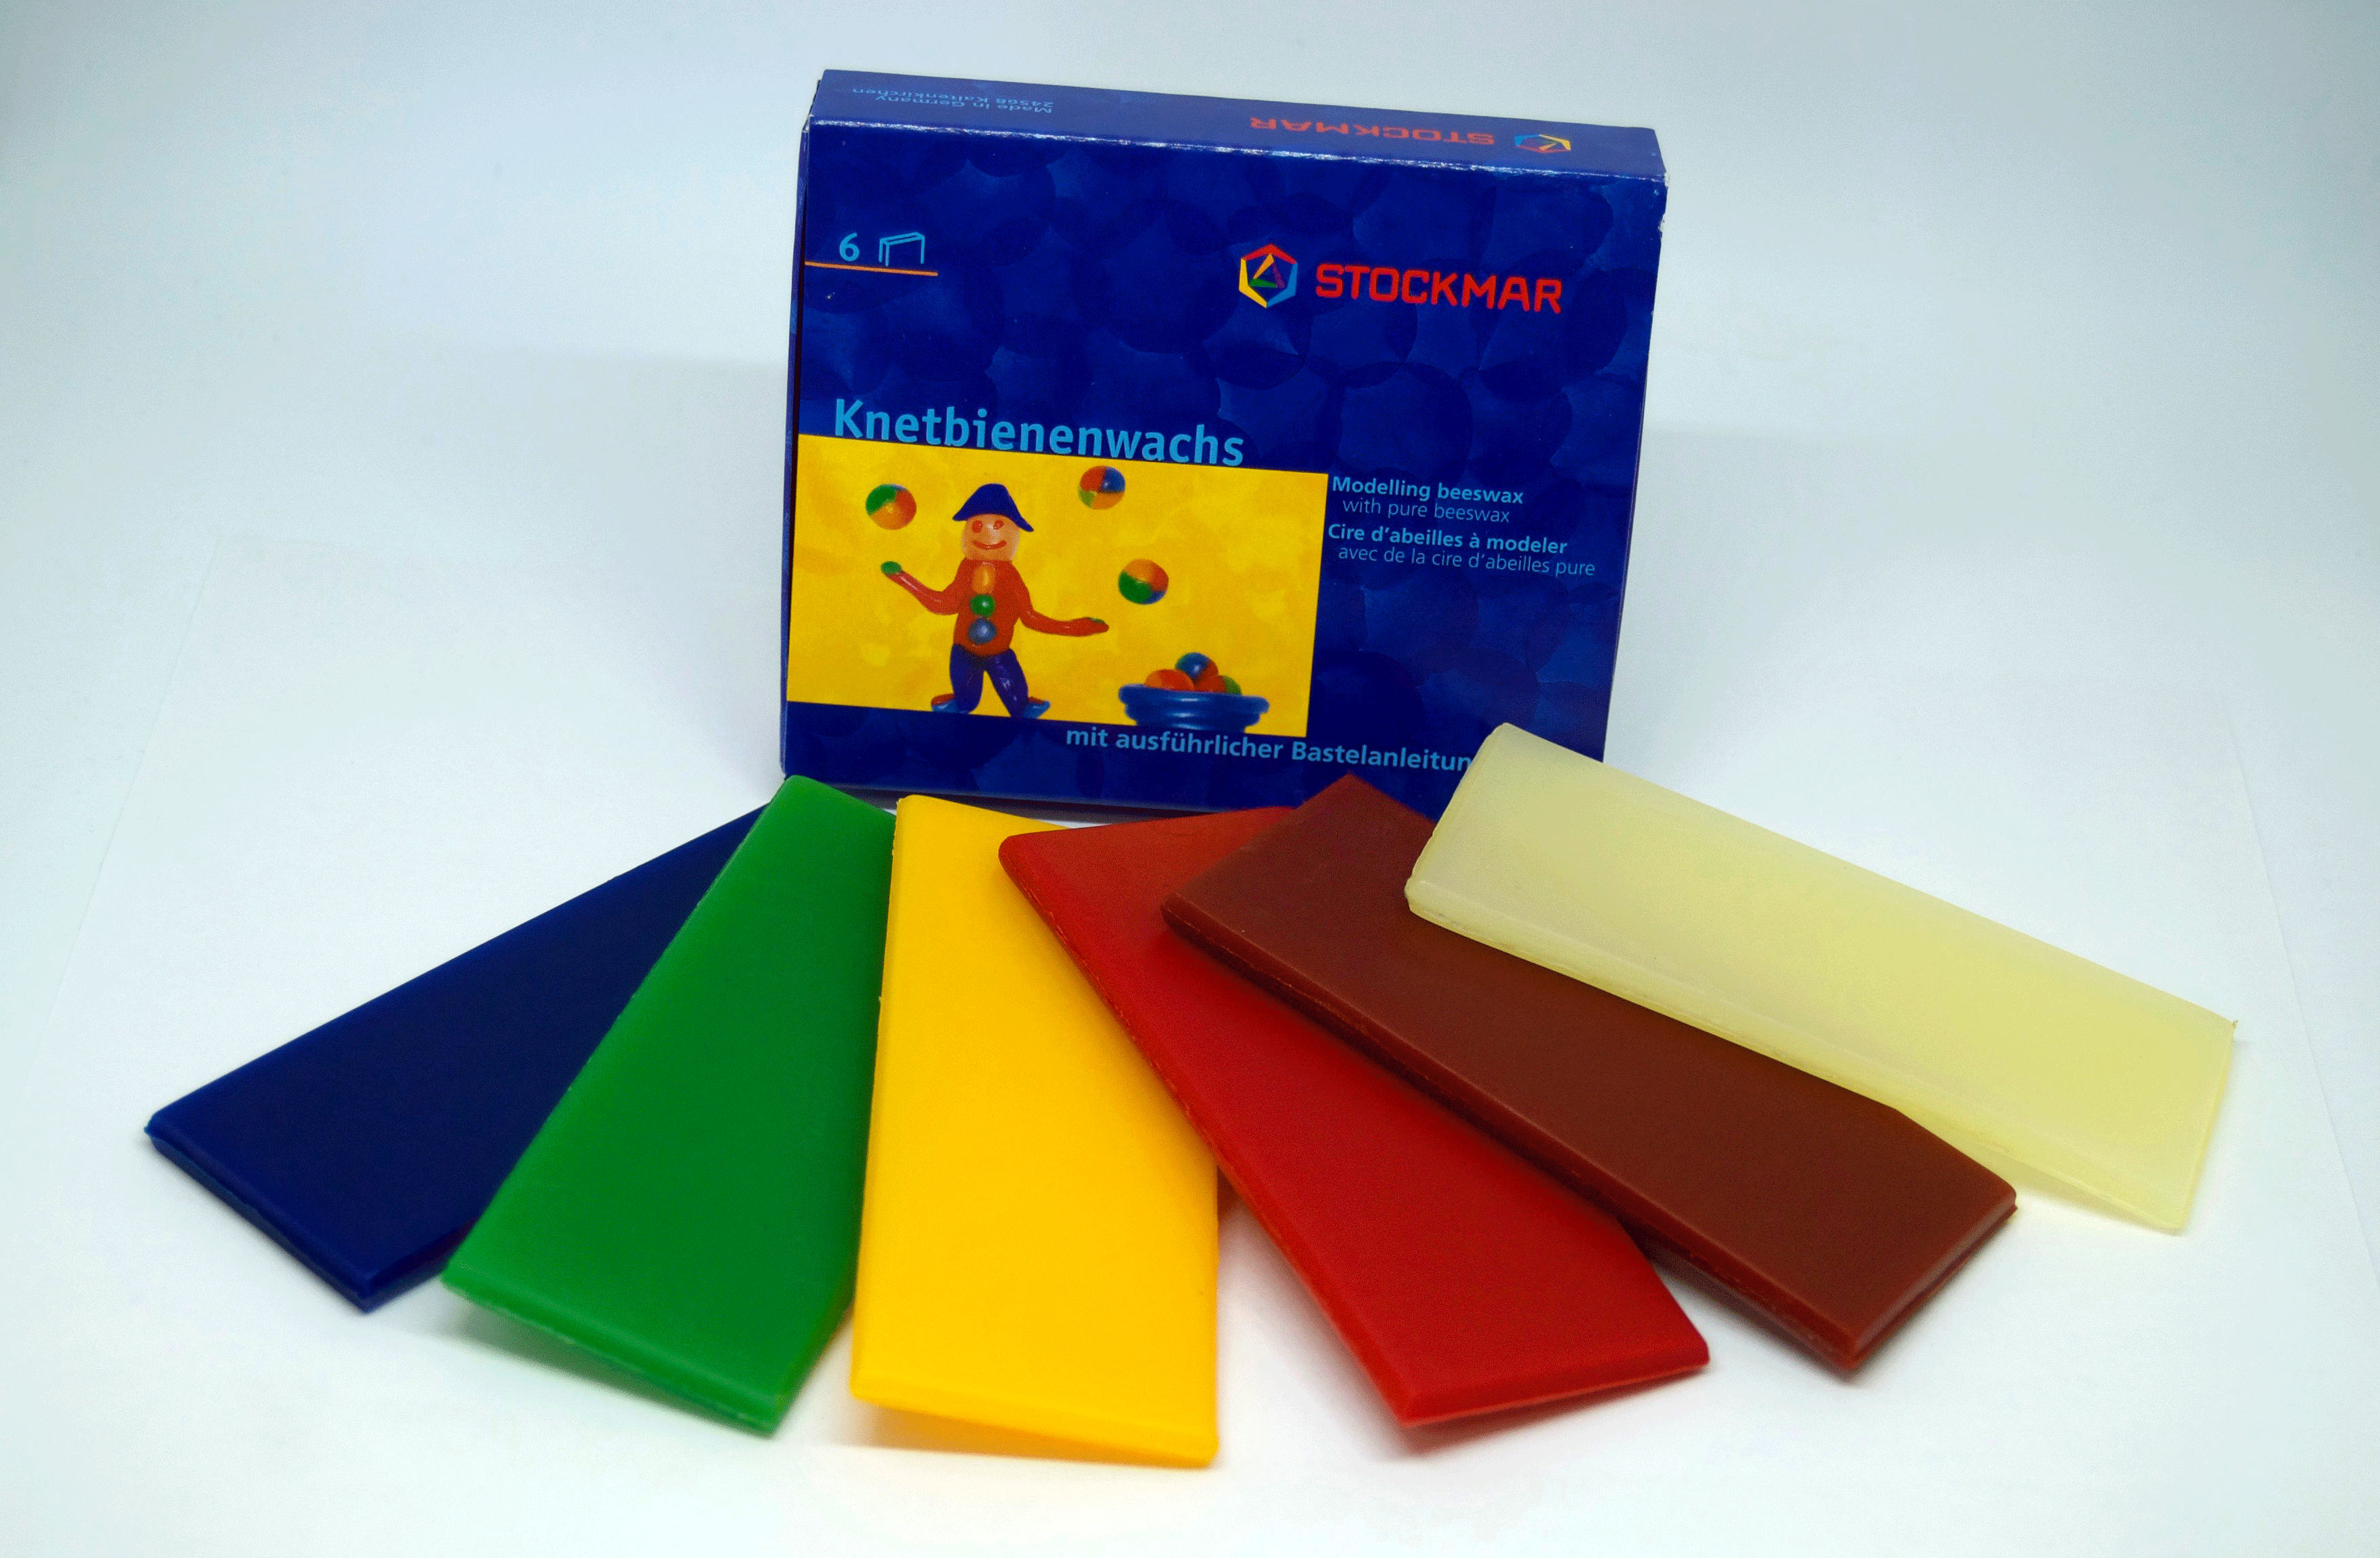 Pliable Modeling Beeswax Softer Than Stockmar Waldorf Molding